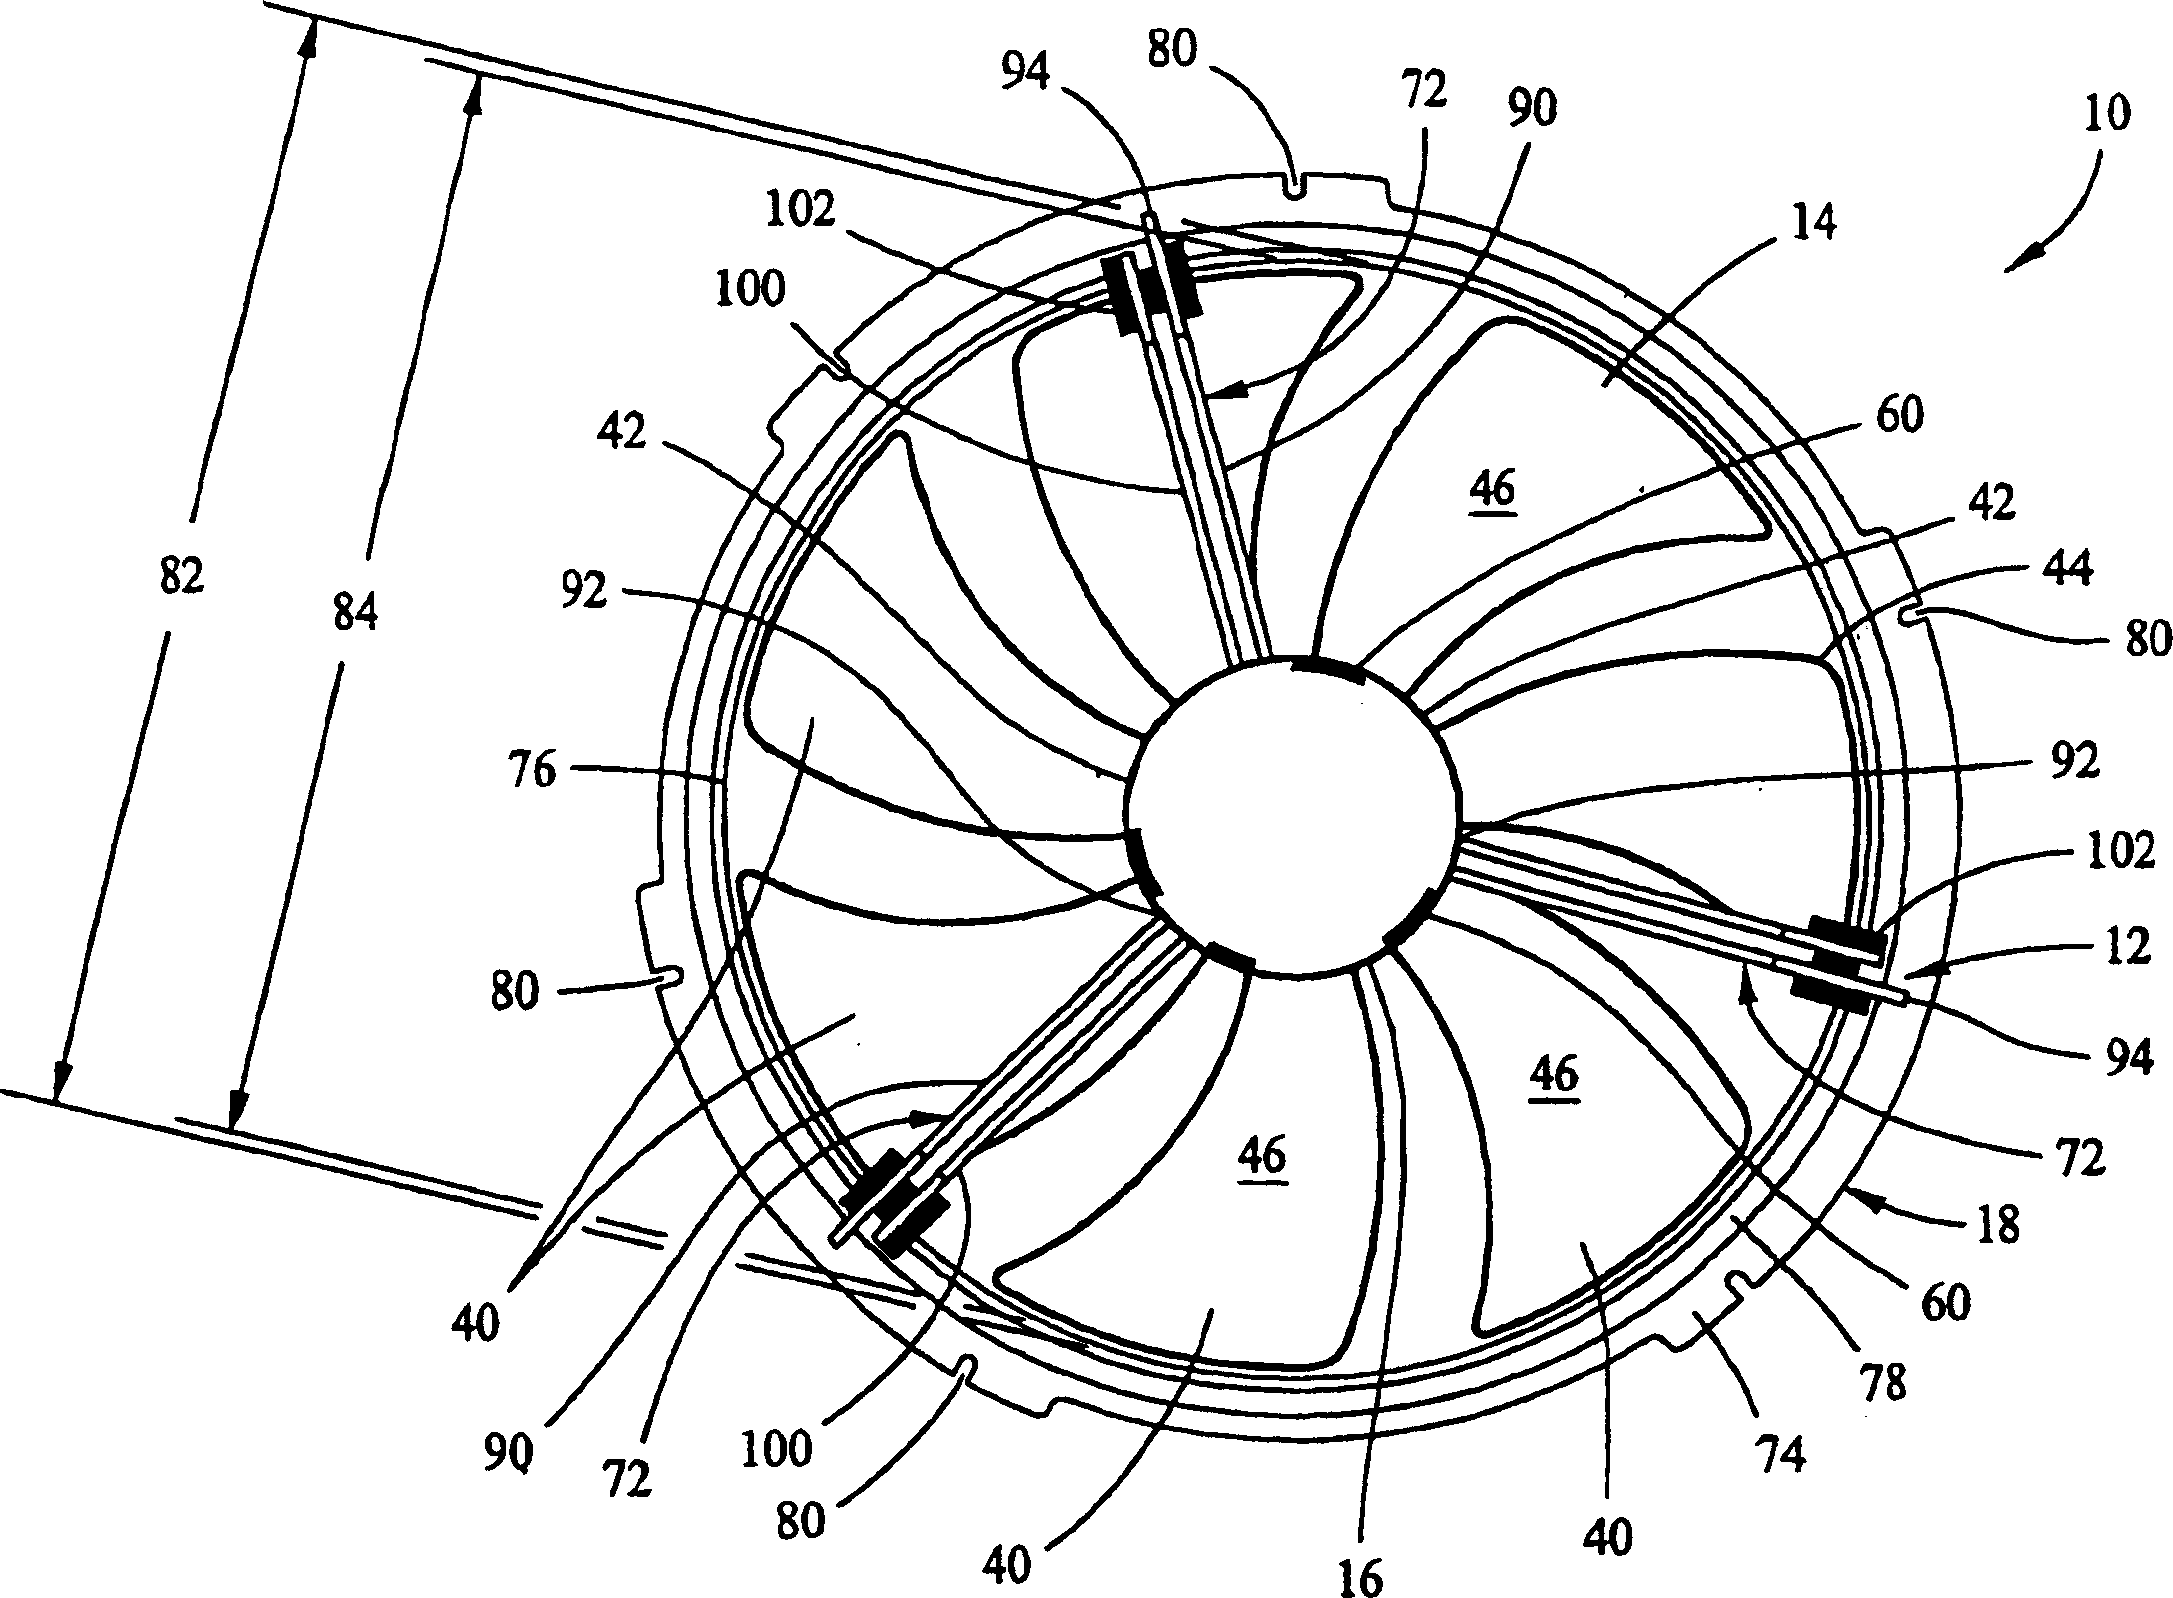 Methods and apparatus for reducing viberations induced within fan assemblies